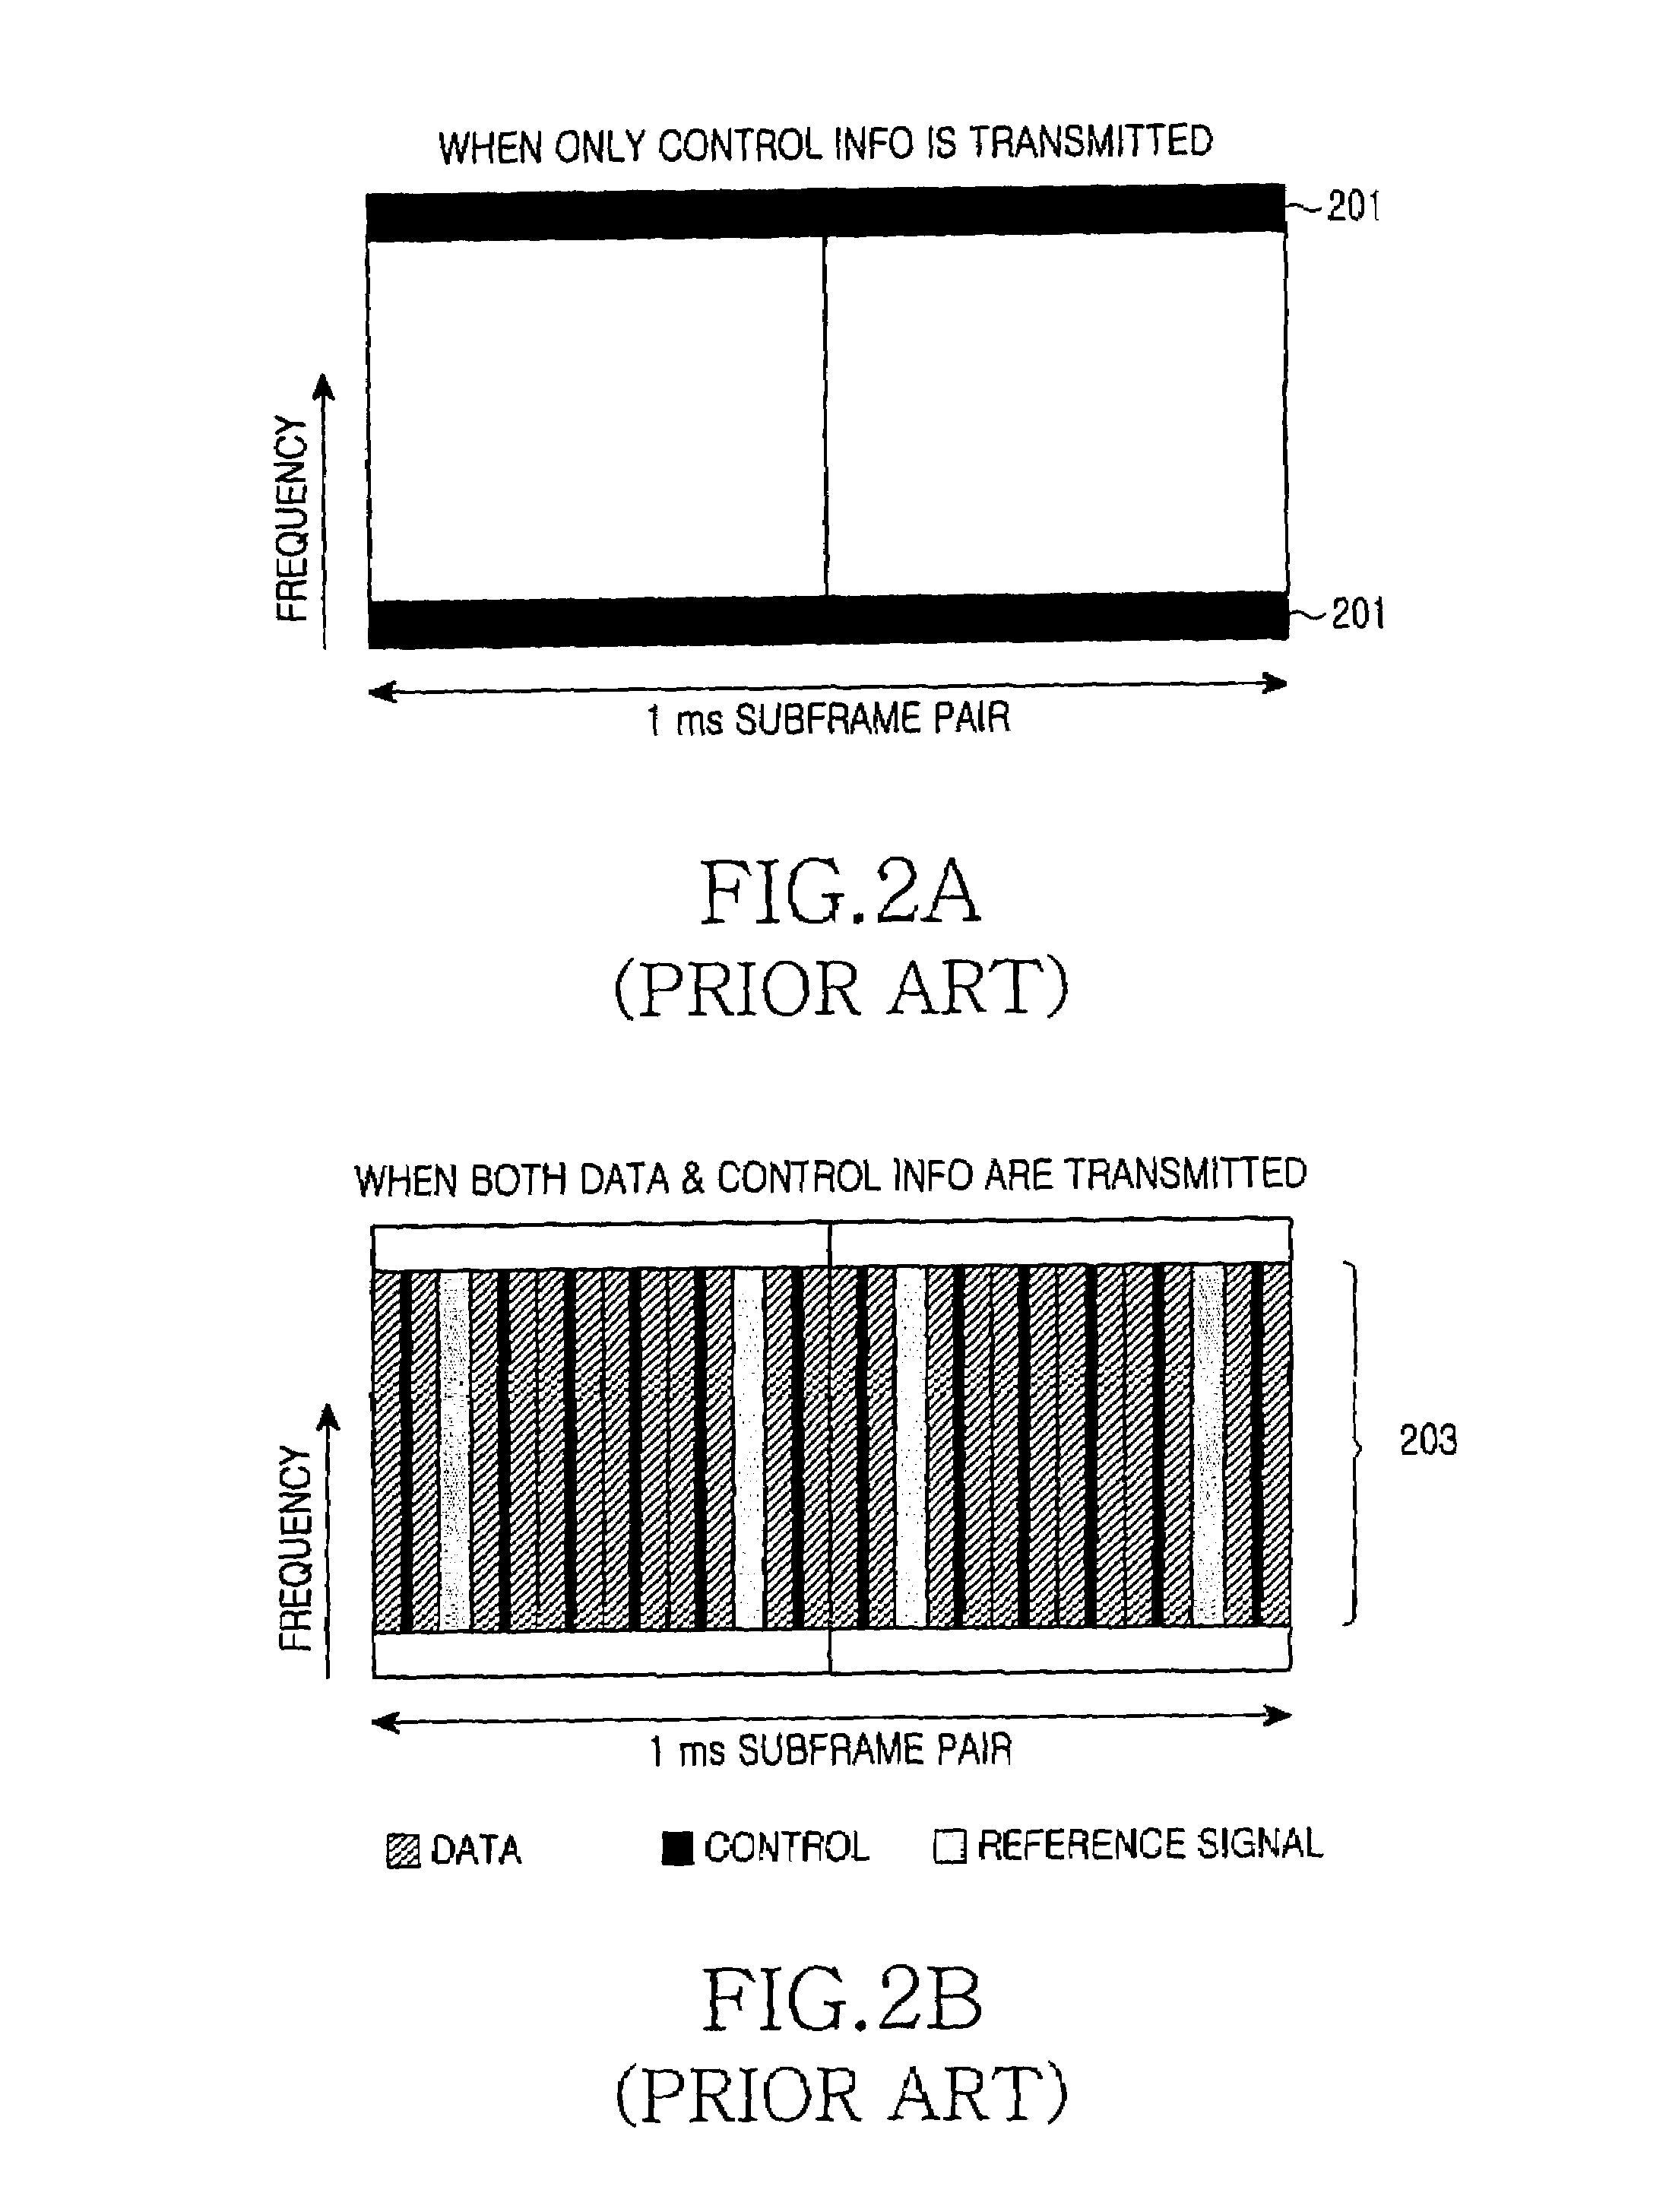 Method and apparatus for transmitting/receiving data and control information through an uplink in a wireless communication system